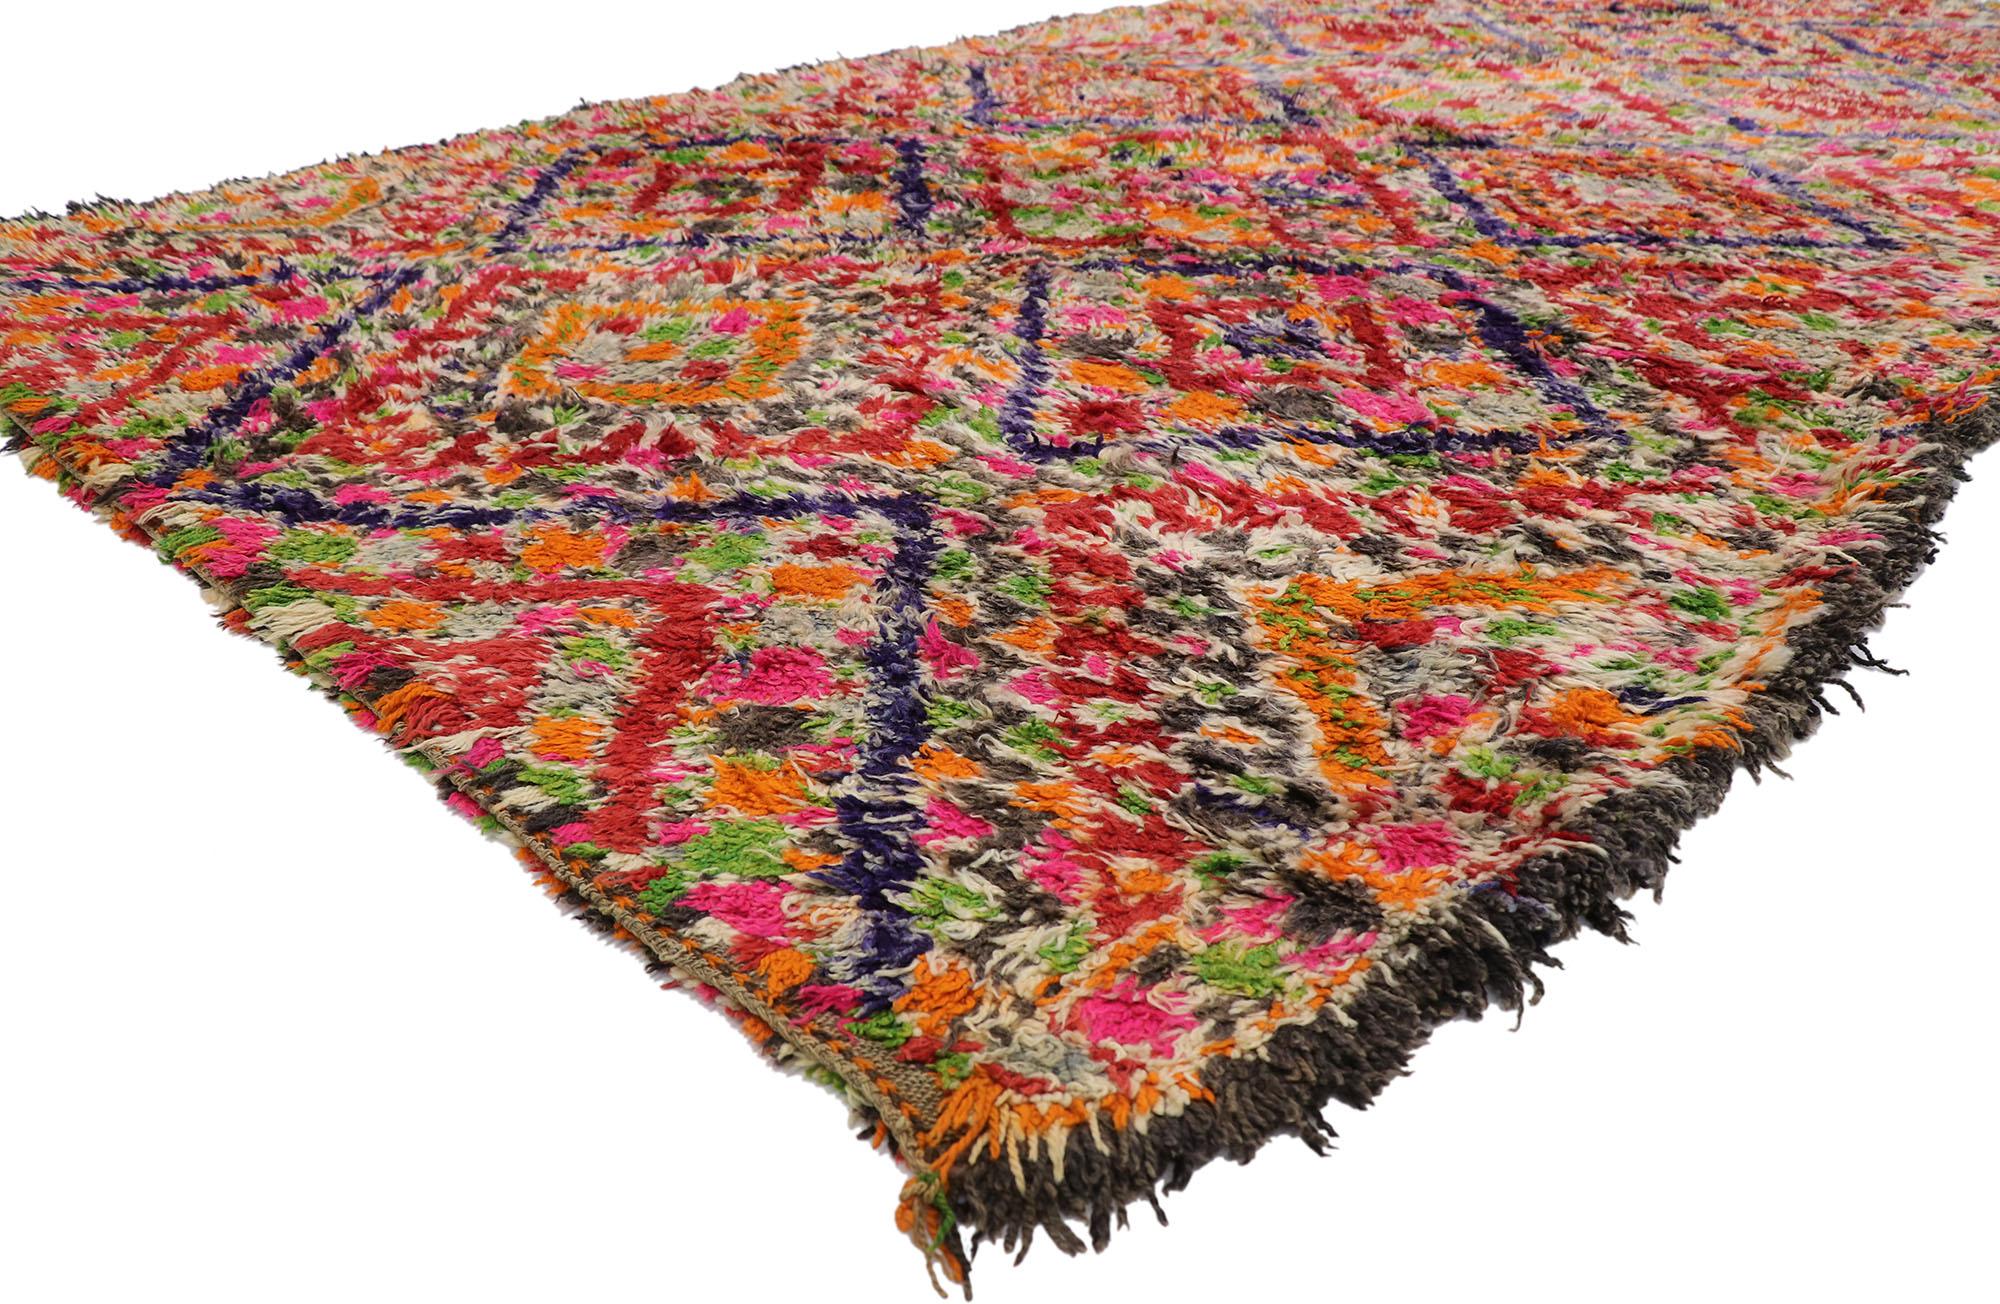 21233 vintage Berber Beni M'Guild Moroccan rug with Mid-Century Modern Tribal style 06'09 x 13'06. Showcasing a bold expressive design, incredible detail and texture, this hand knotted wool vintage Berber Beni M'Guild Moroccan rug is a captivating